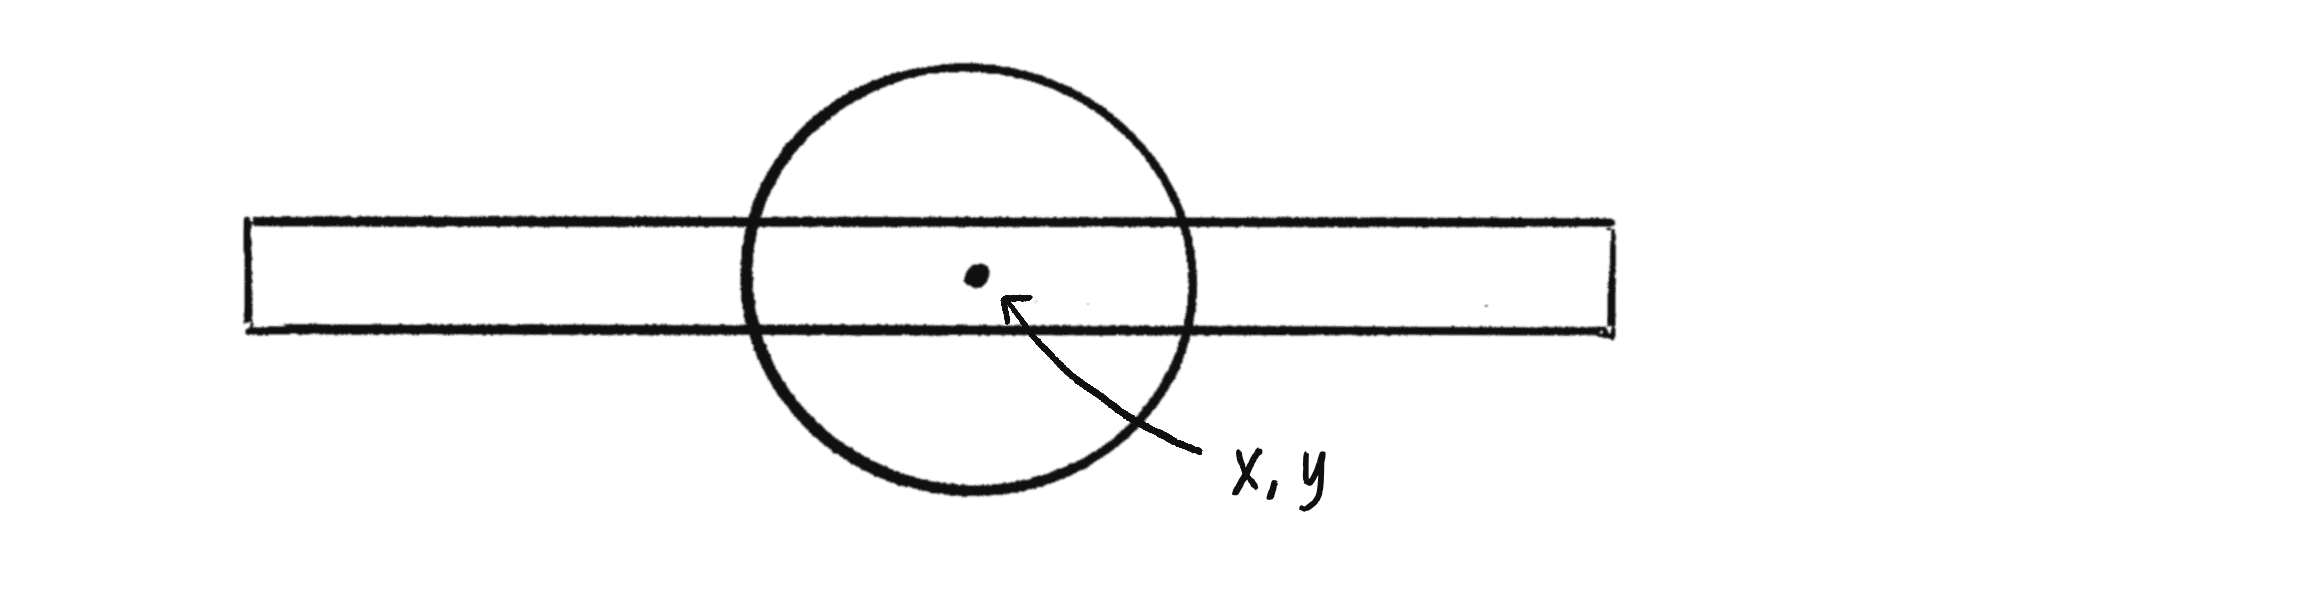 Figure 6.7: A rectangle and a circle with the same (x, y) reference point.